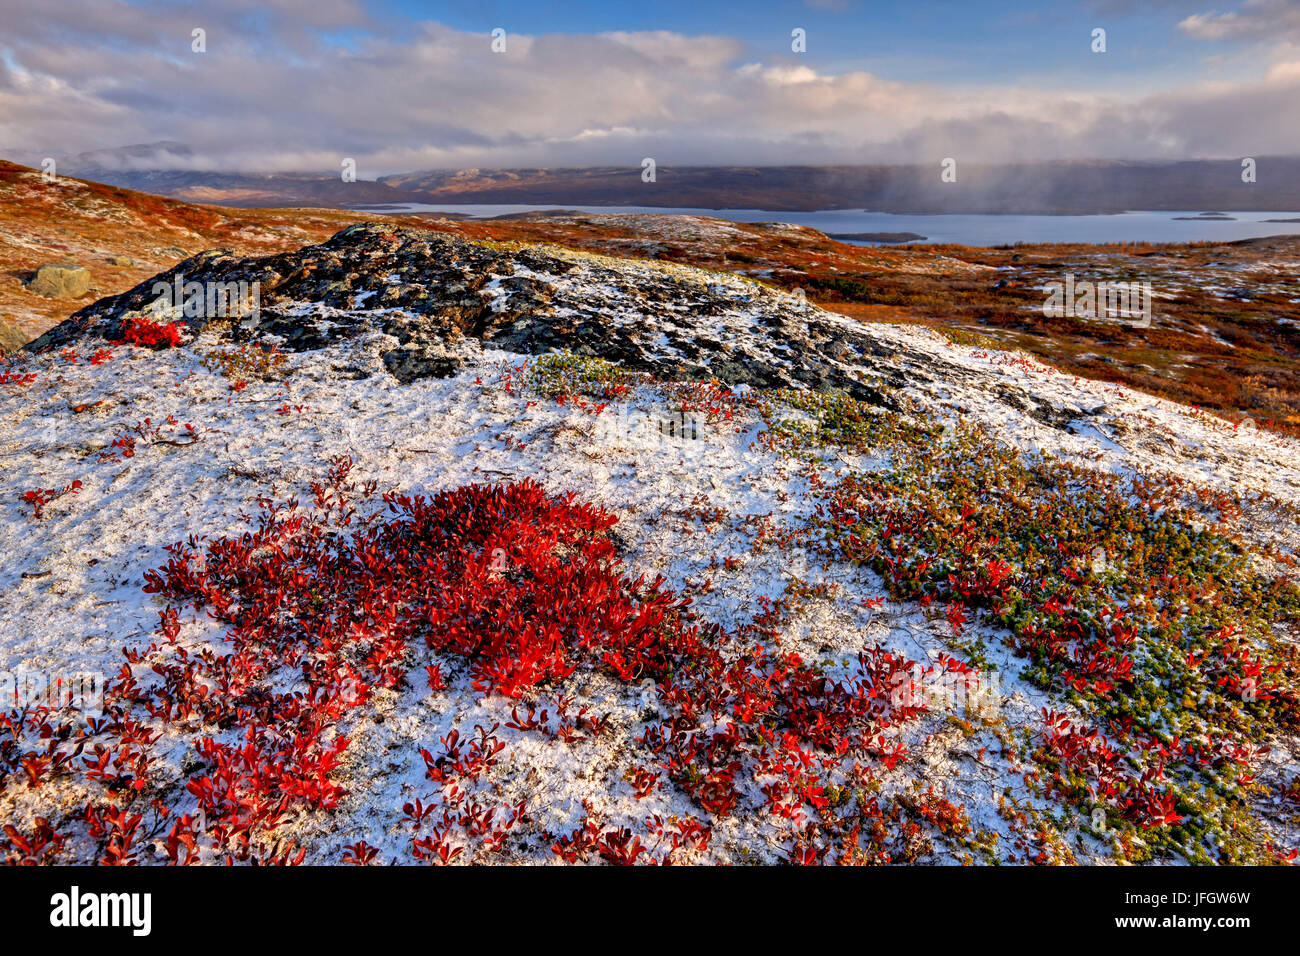 Europe, Sweden, Lapland, province of Norrbotten, Abisko national park, tundra, in the background of the Torneträsk Stock Photo